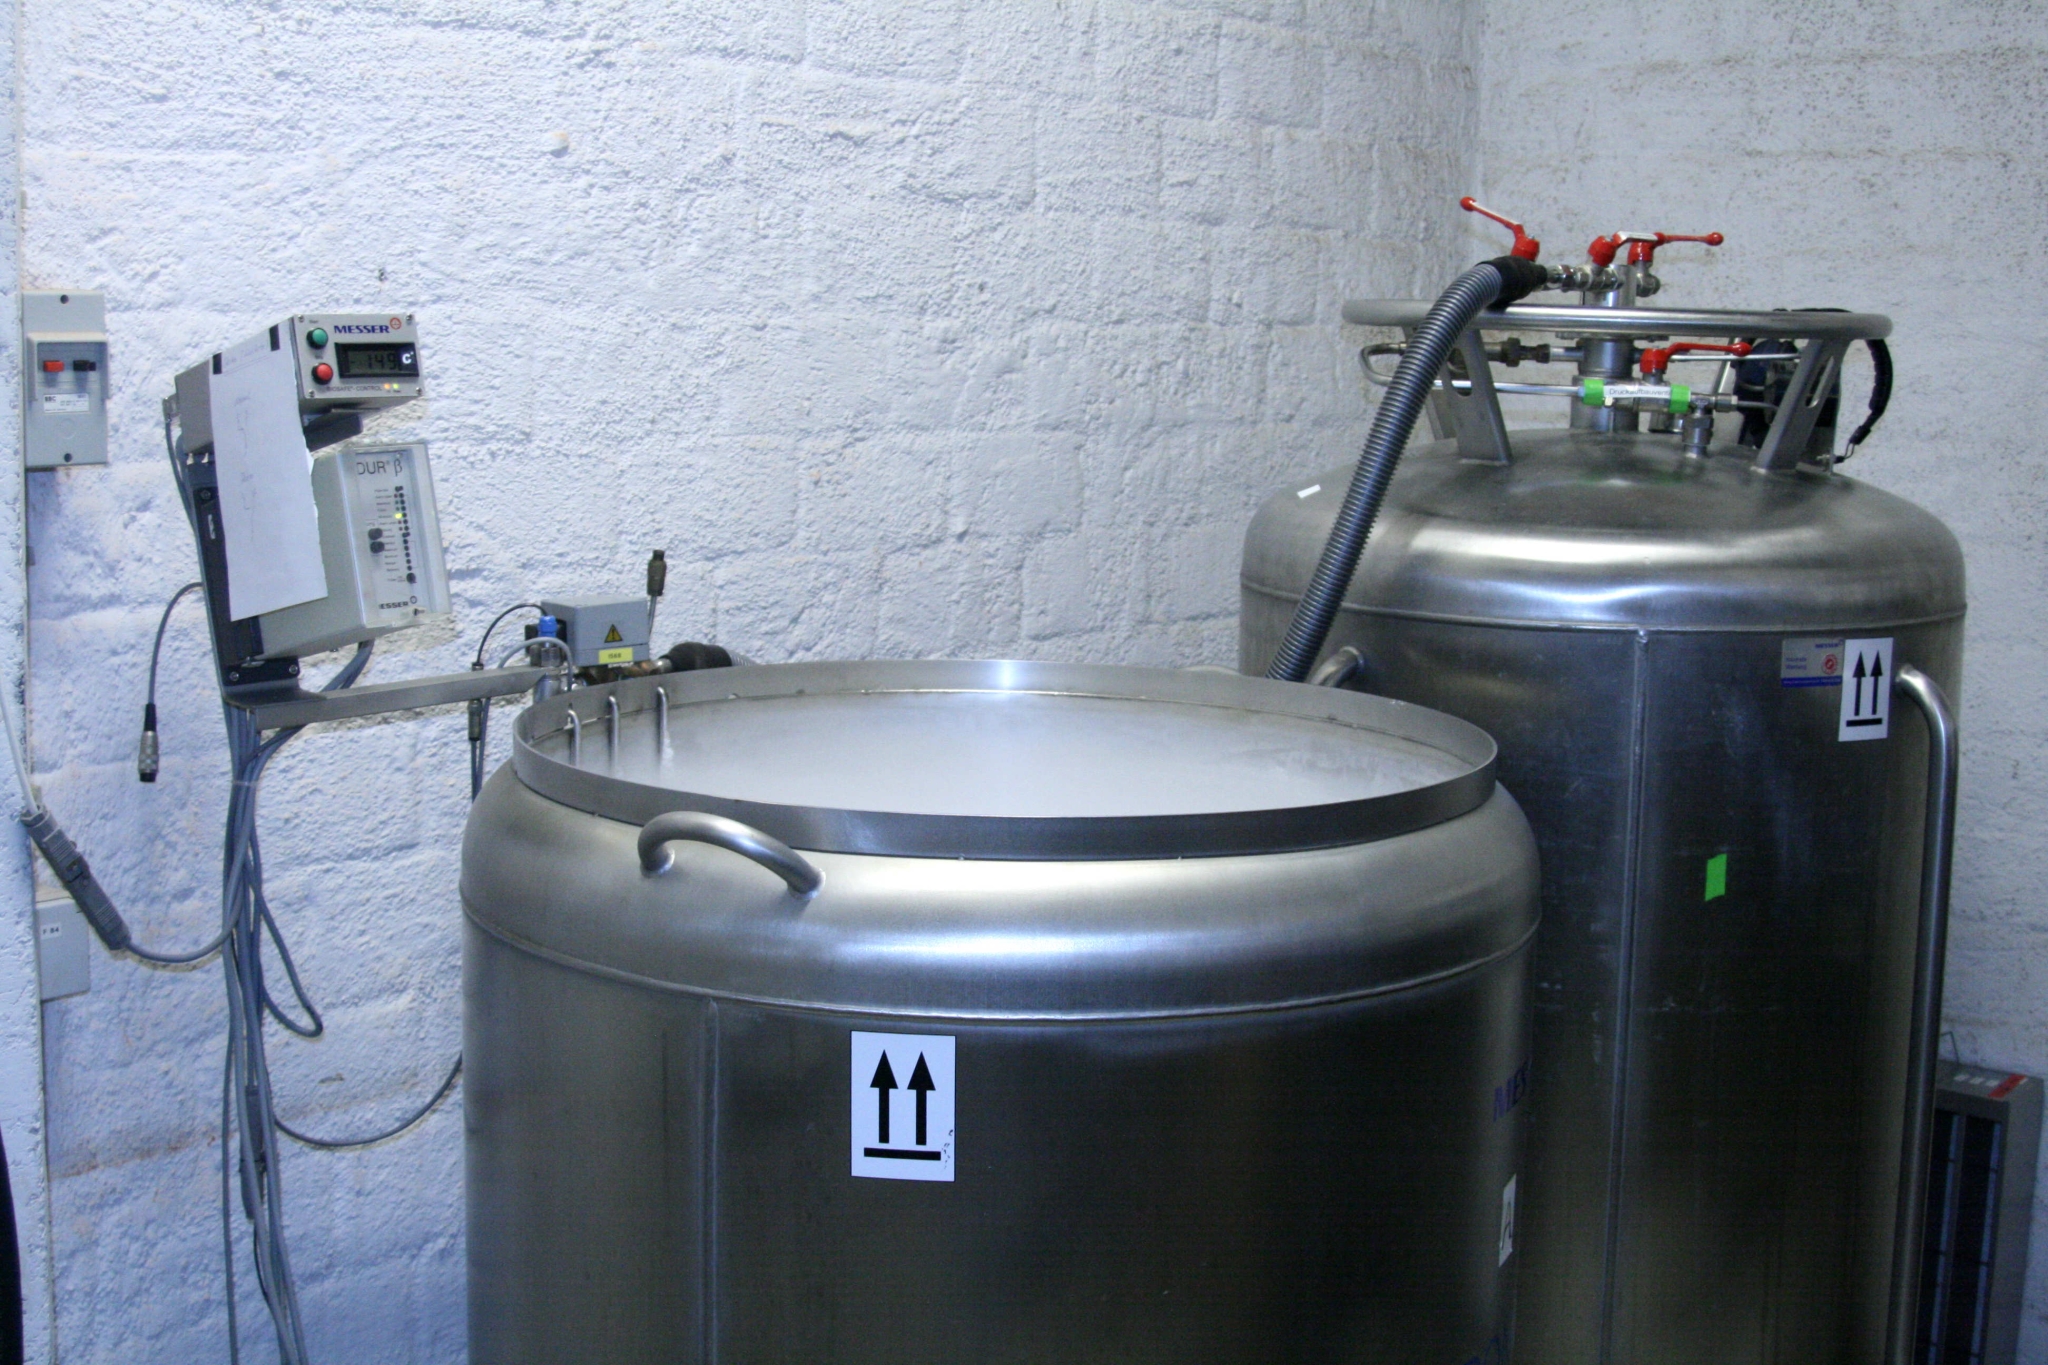 The photo shows a metal container from which white steam extrudes. The container is connected to another metal container via a tube, and to a small electronic box via cables.